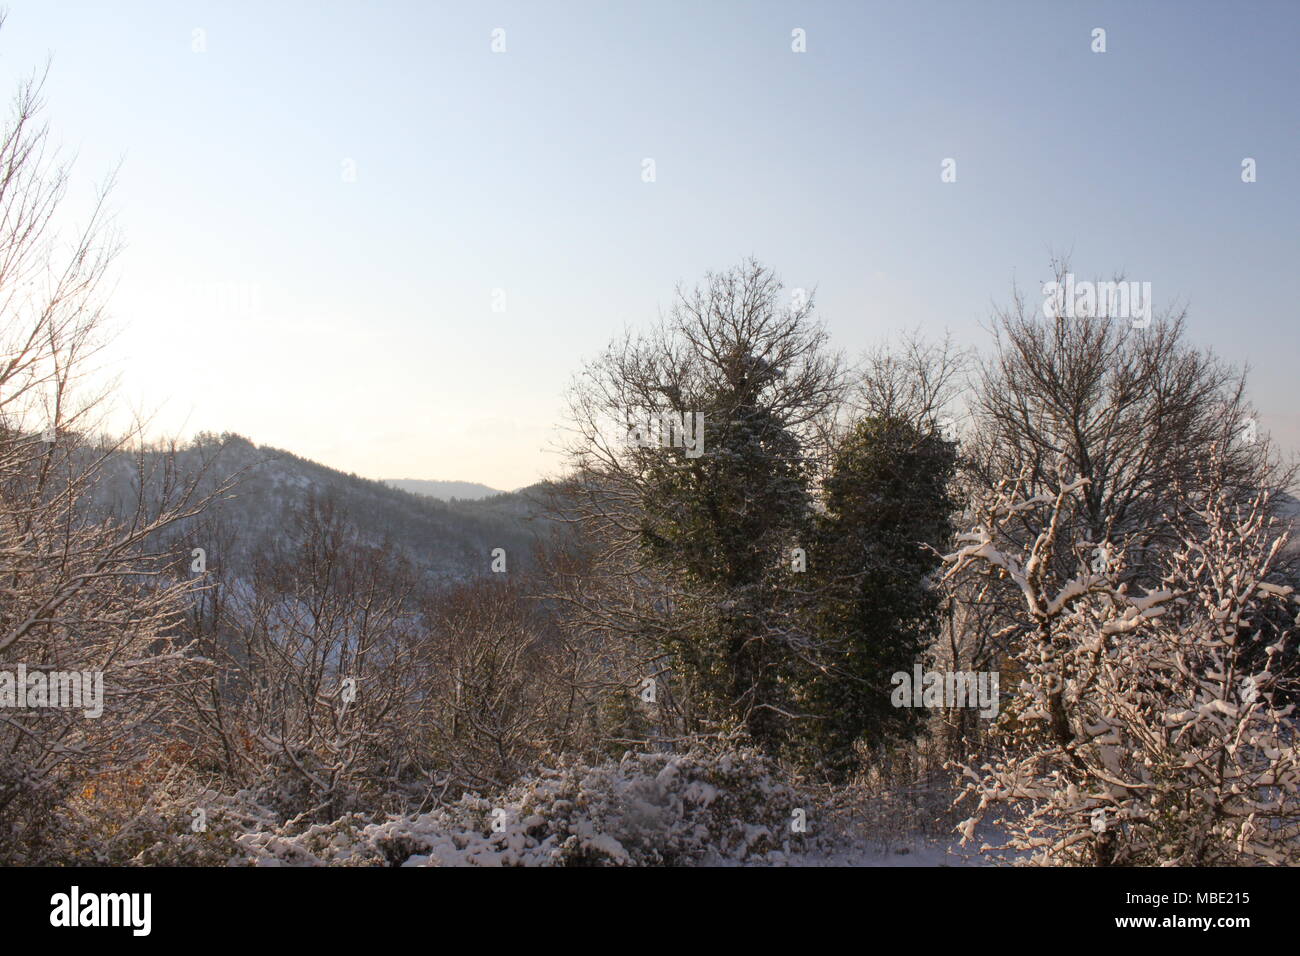 Frost and snow begins to settle on nearby trees and mountains in the distance. Stock Photo